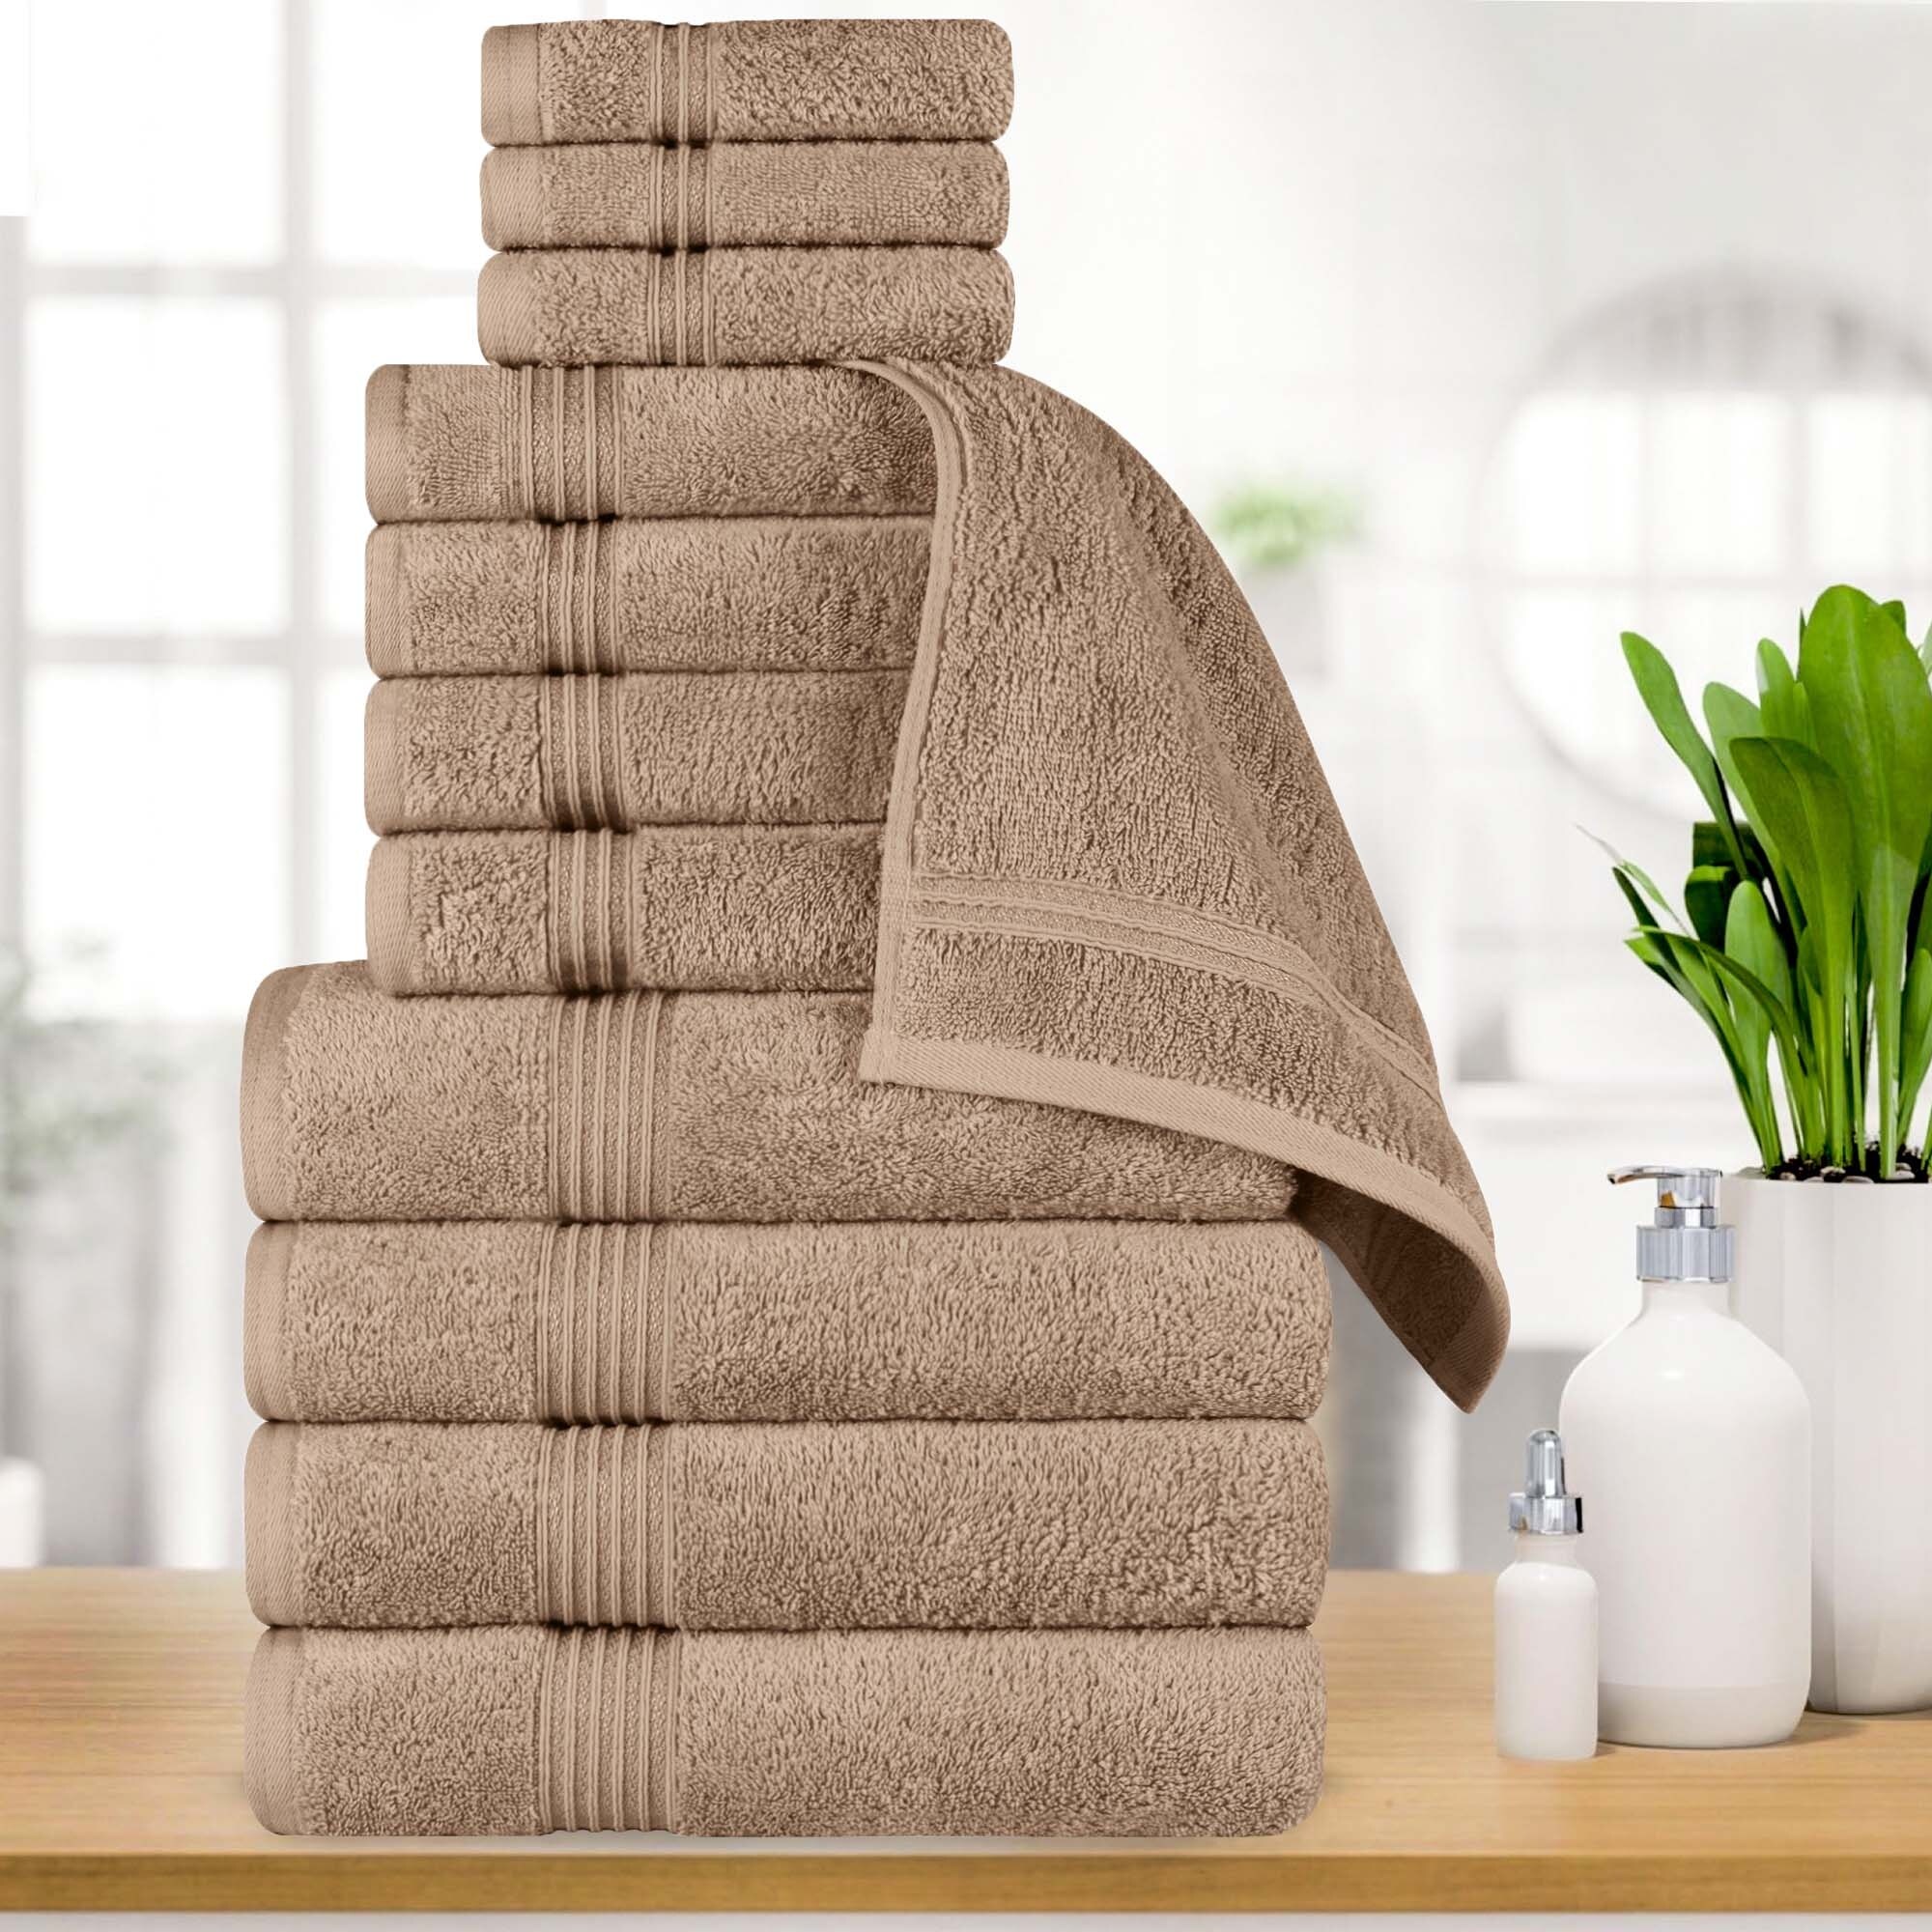 https://ak1.ostkcdn.com/images/products/is/images/direct/73ed25a52555f9a715e809377c4bb44b9a29ad7b/Superior-Heritage-Egyptian-Cotton-Heavyweight-12-Piece-Bathroom-Towel-Set.jpg